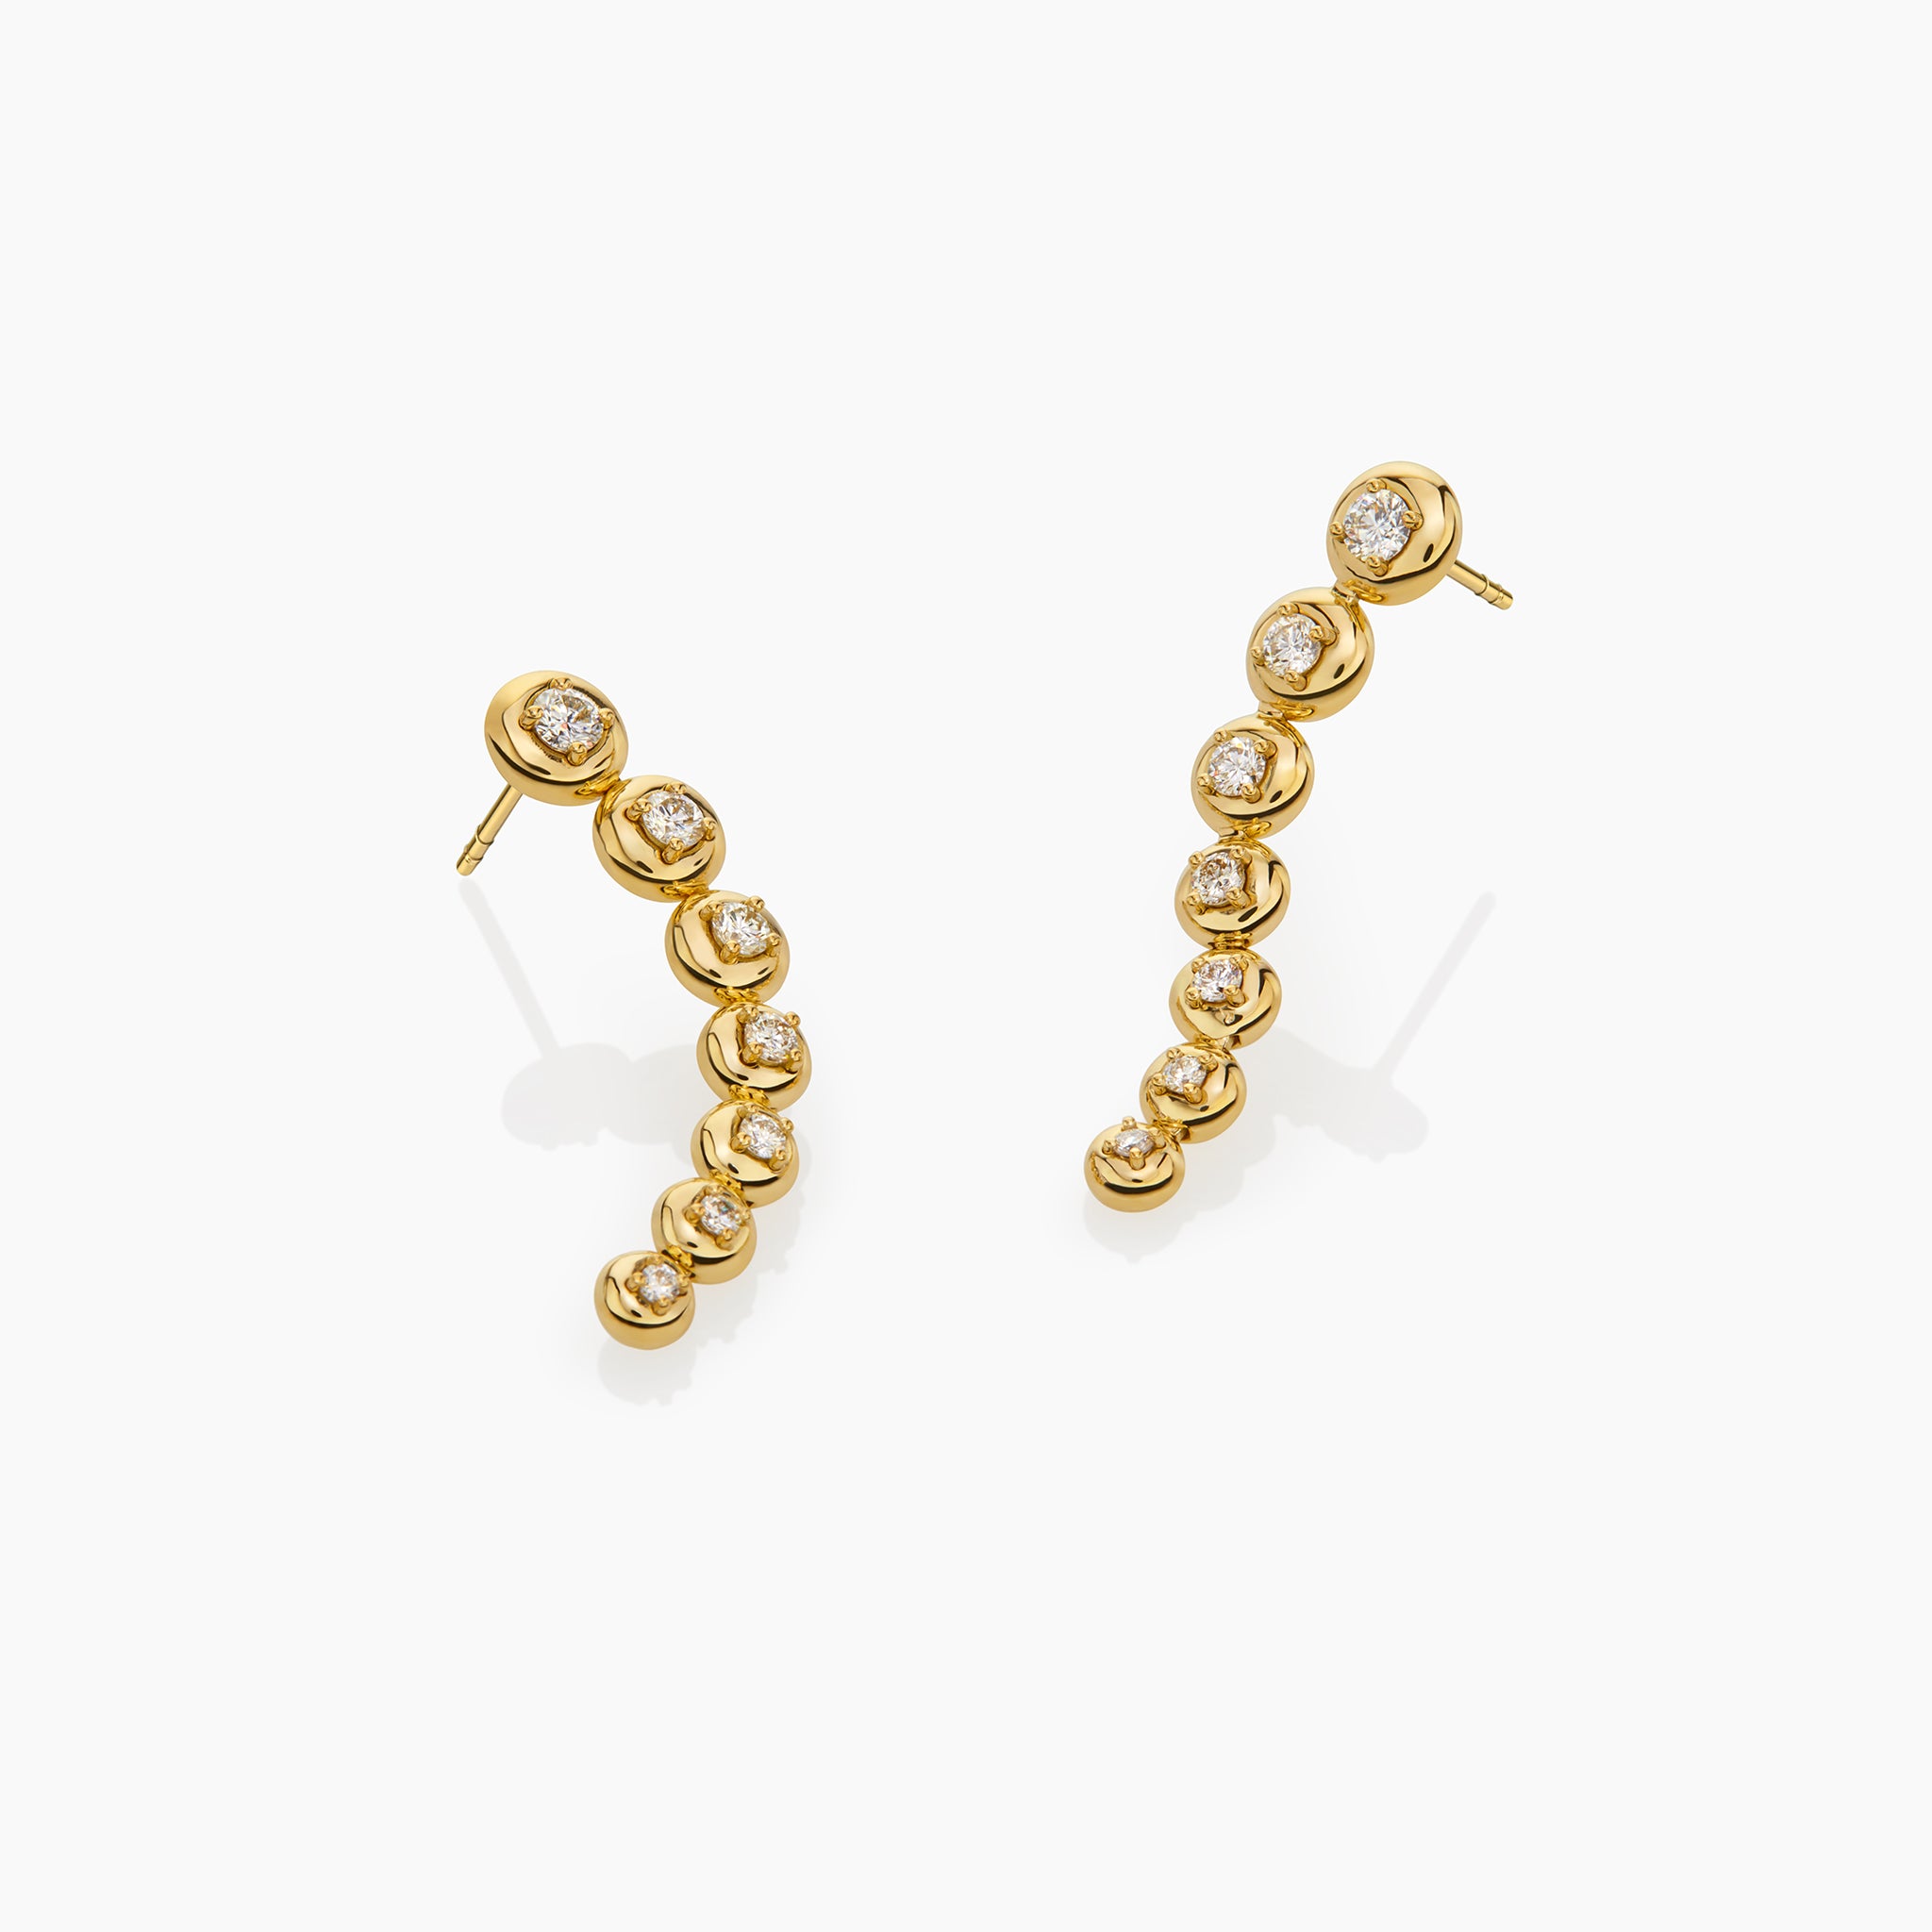 Star trail earrings in yellow gold adorned with diamonds displayed on an off white background. 